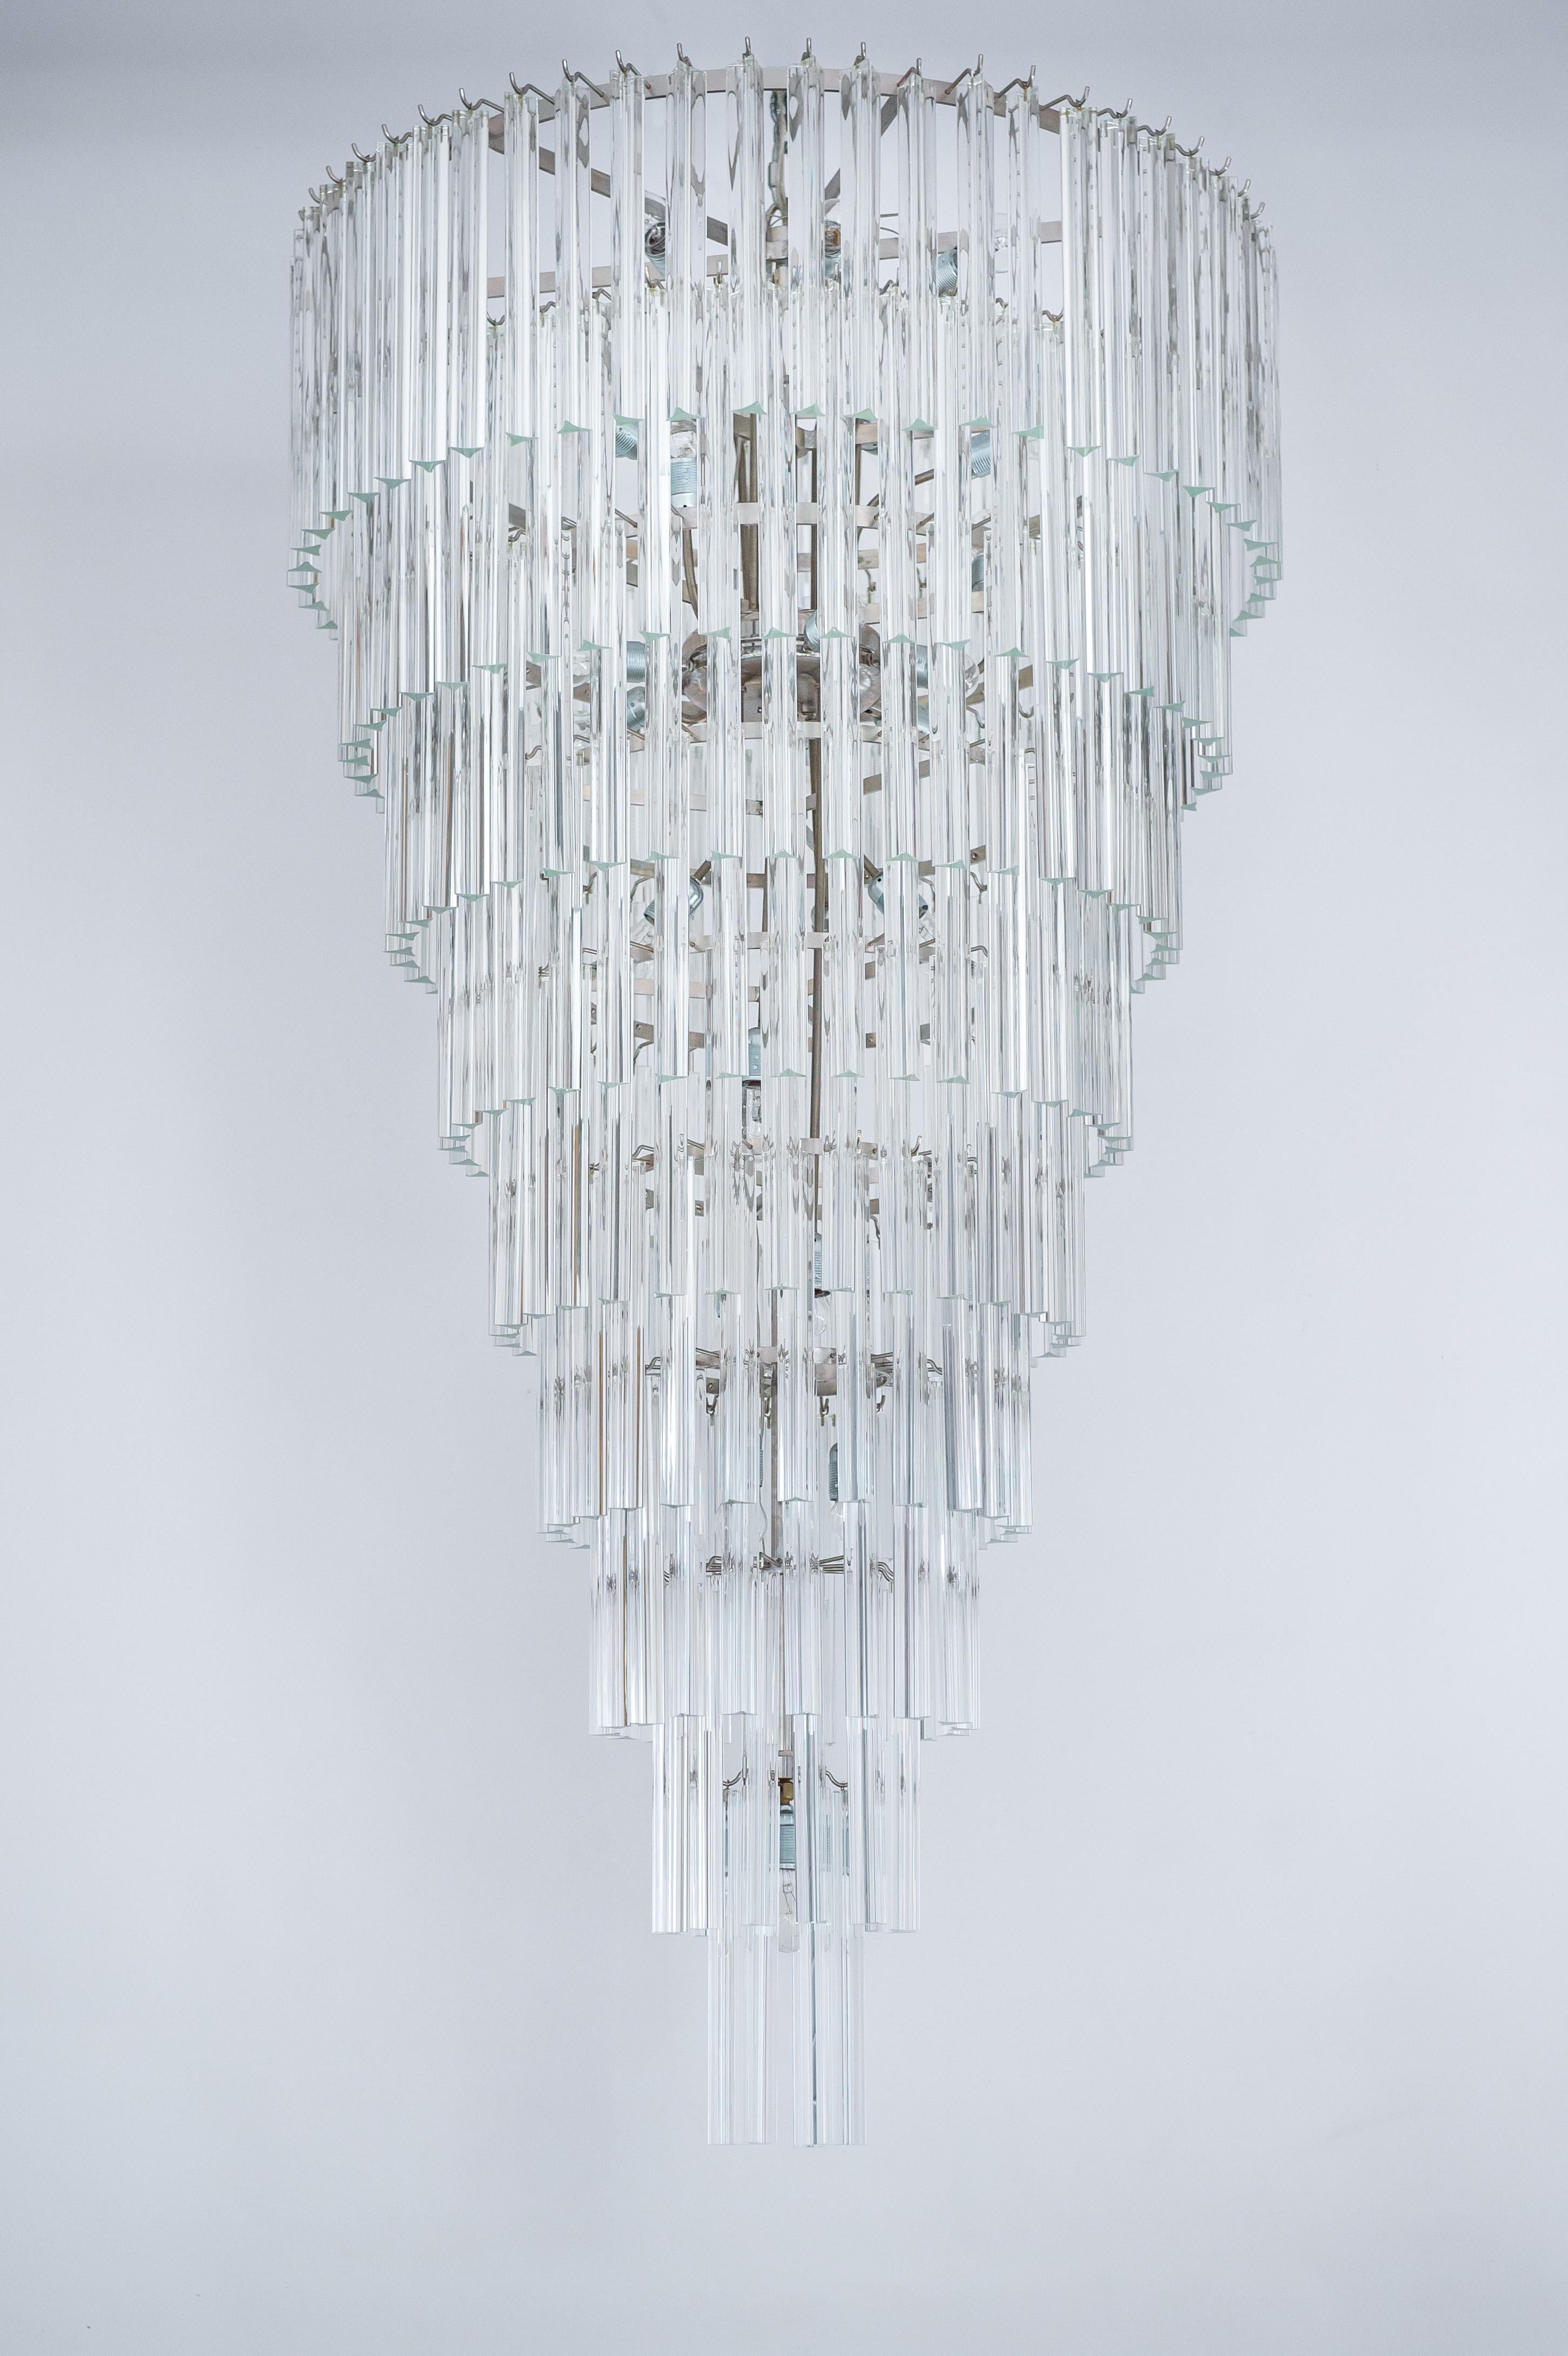 21st Century Transparent Murano Glass Cone Chandelier, Made in Venice.
This outstanding chandelier brings within itself a refined touch of Venice, through its elegant shape and its bright lights, the result of the Venetian centuries-old glassmaking